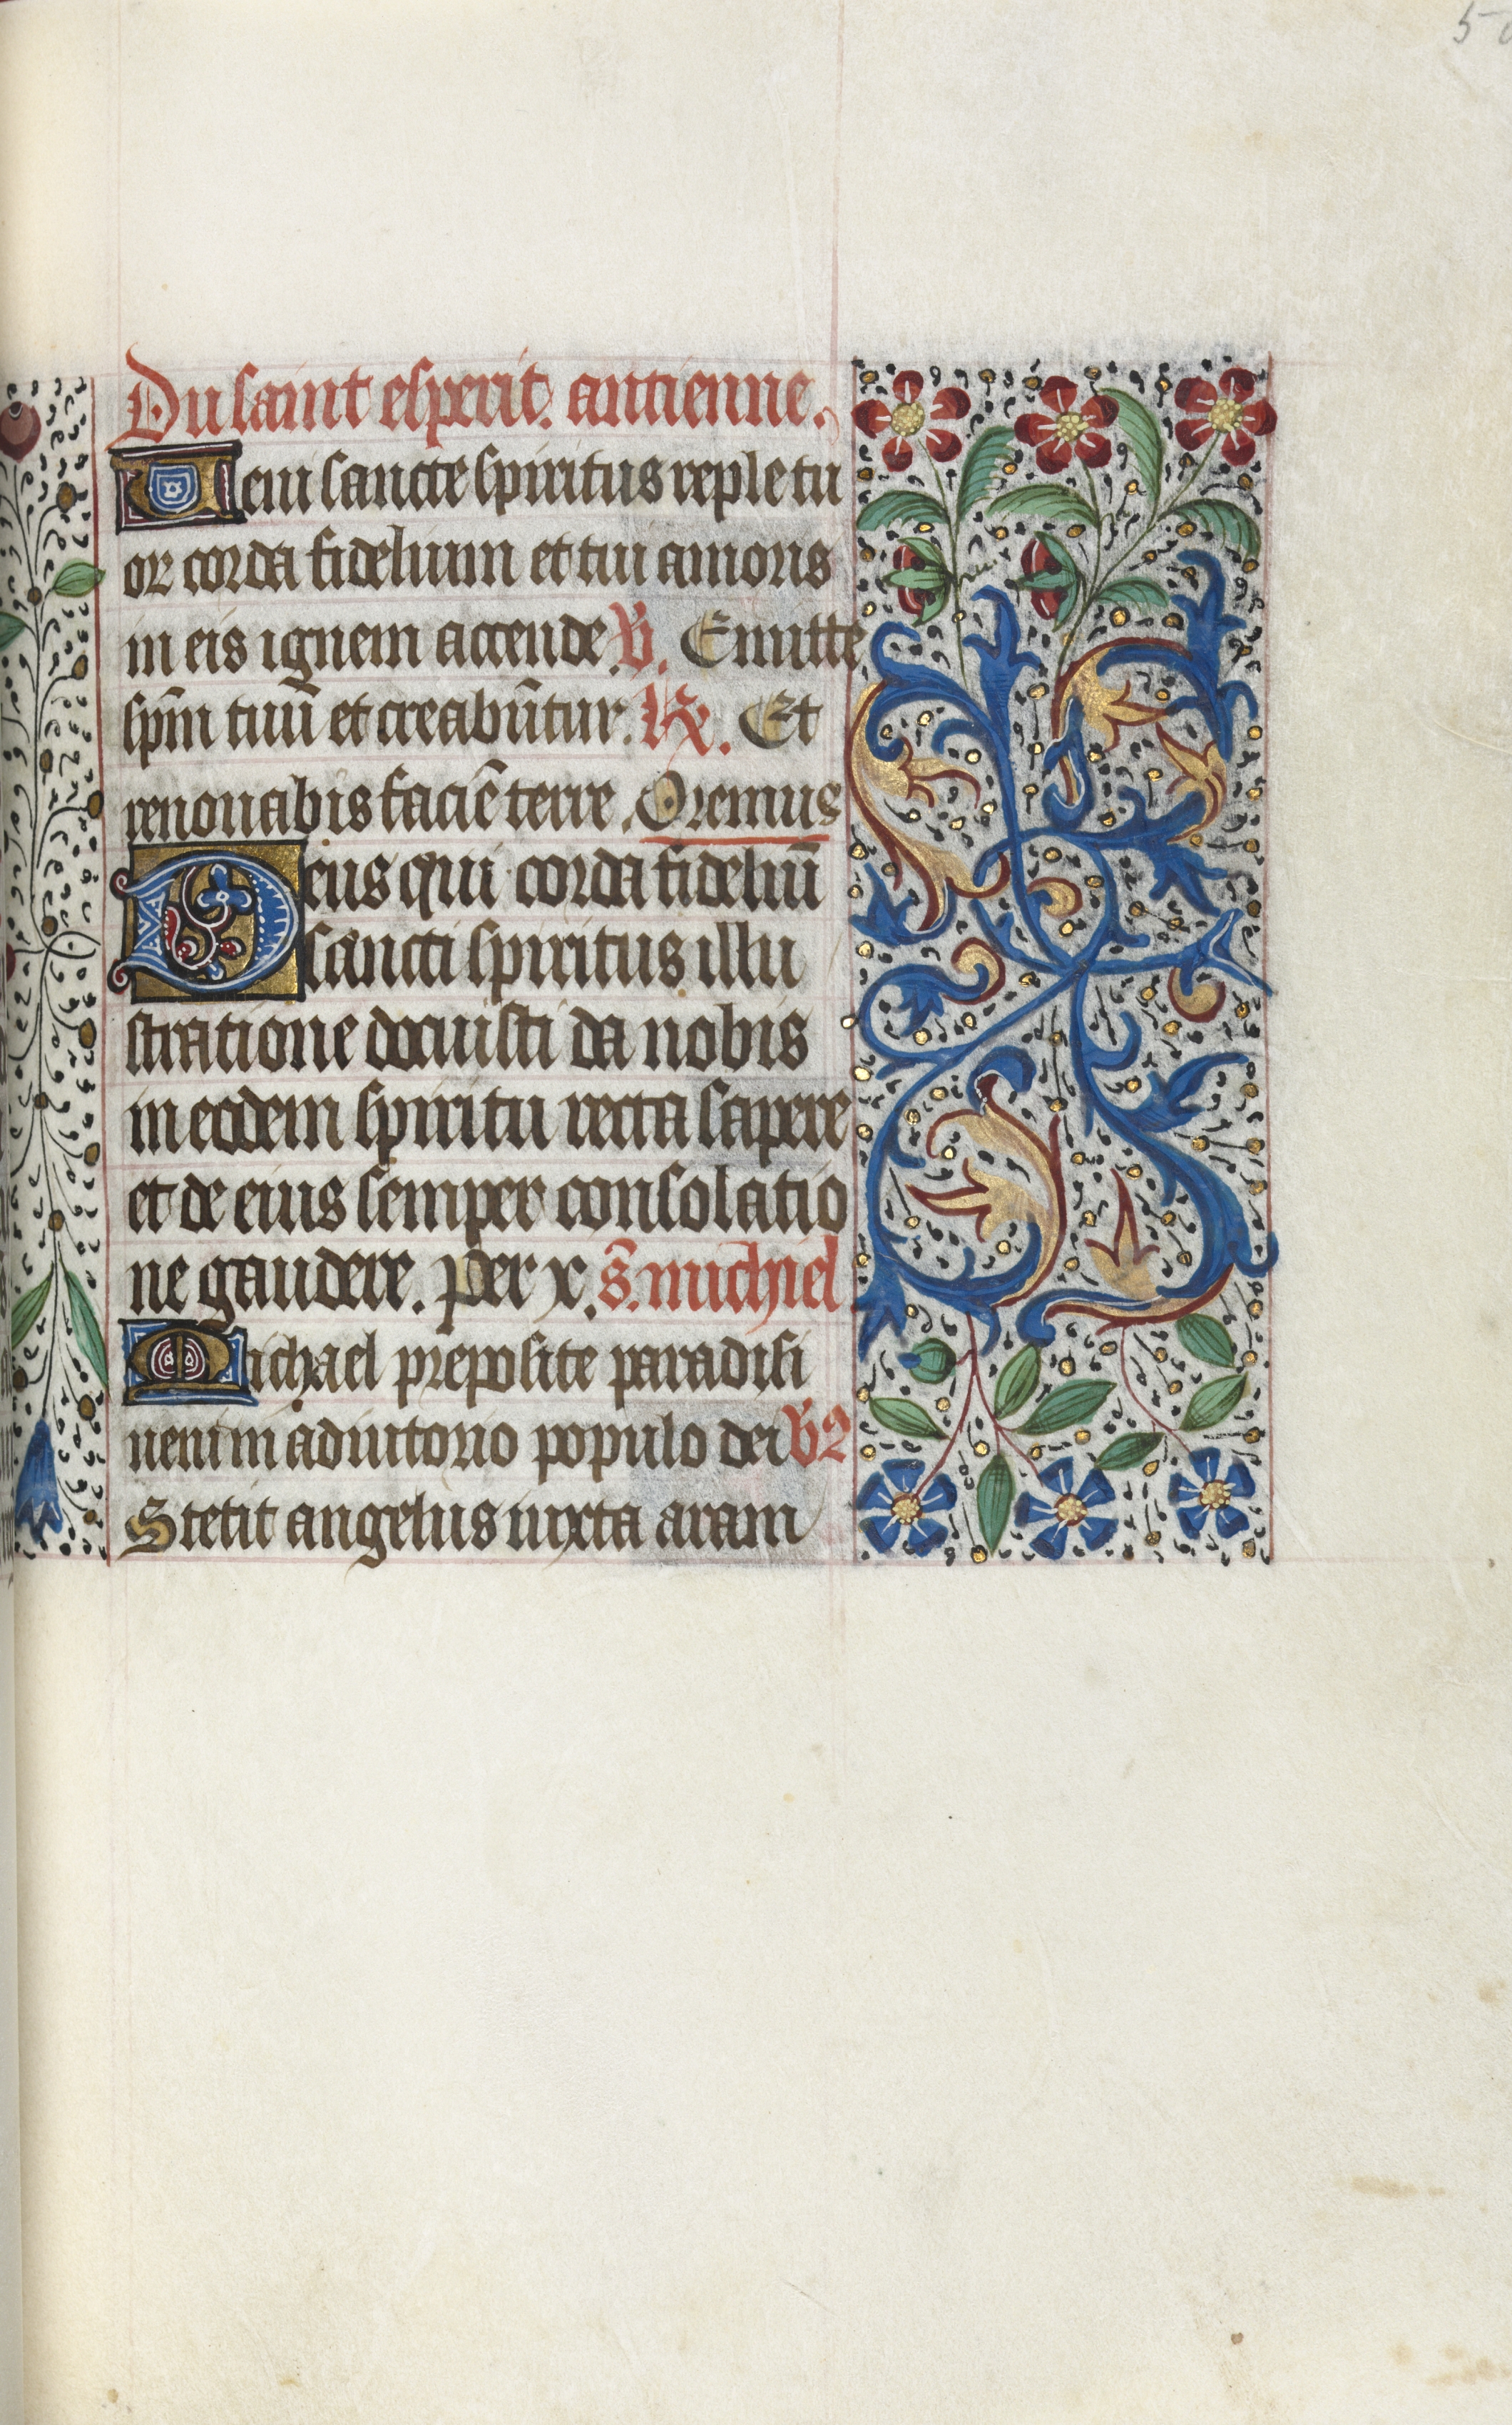 Book of Hours (Use of Rouen): fol. 50r